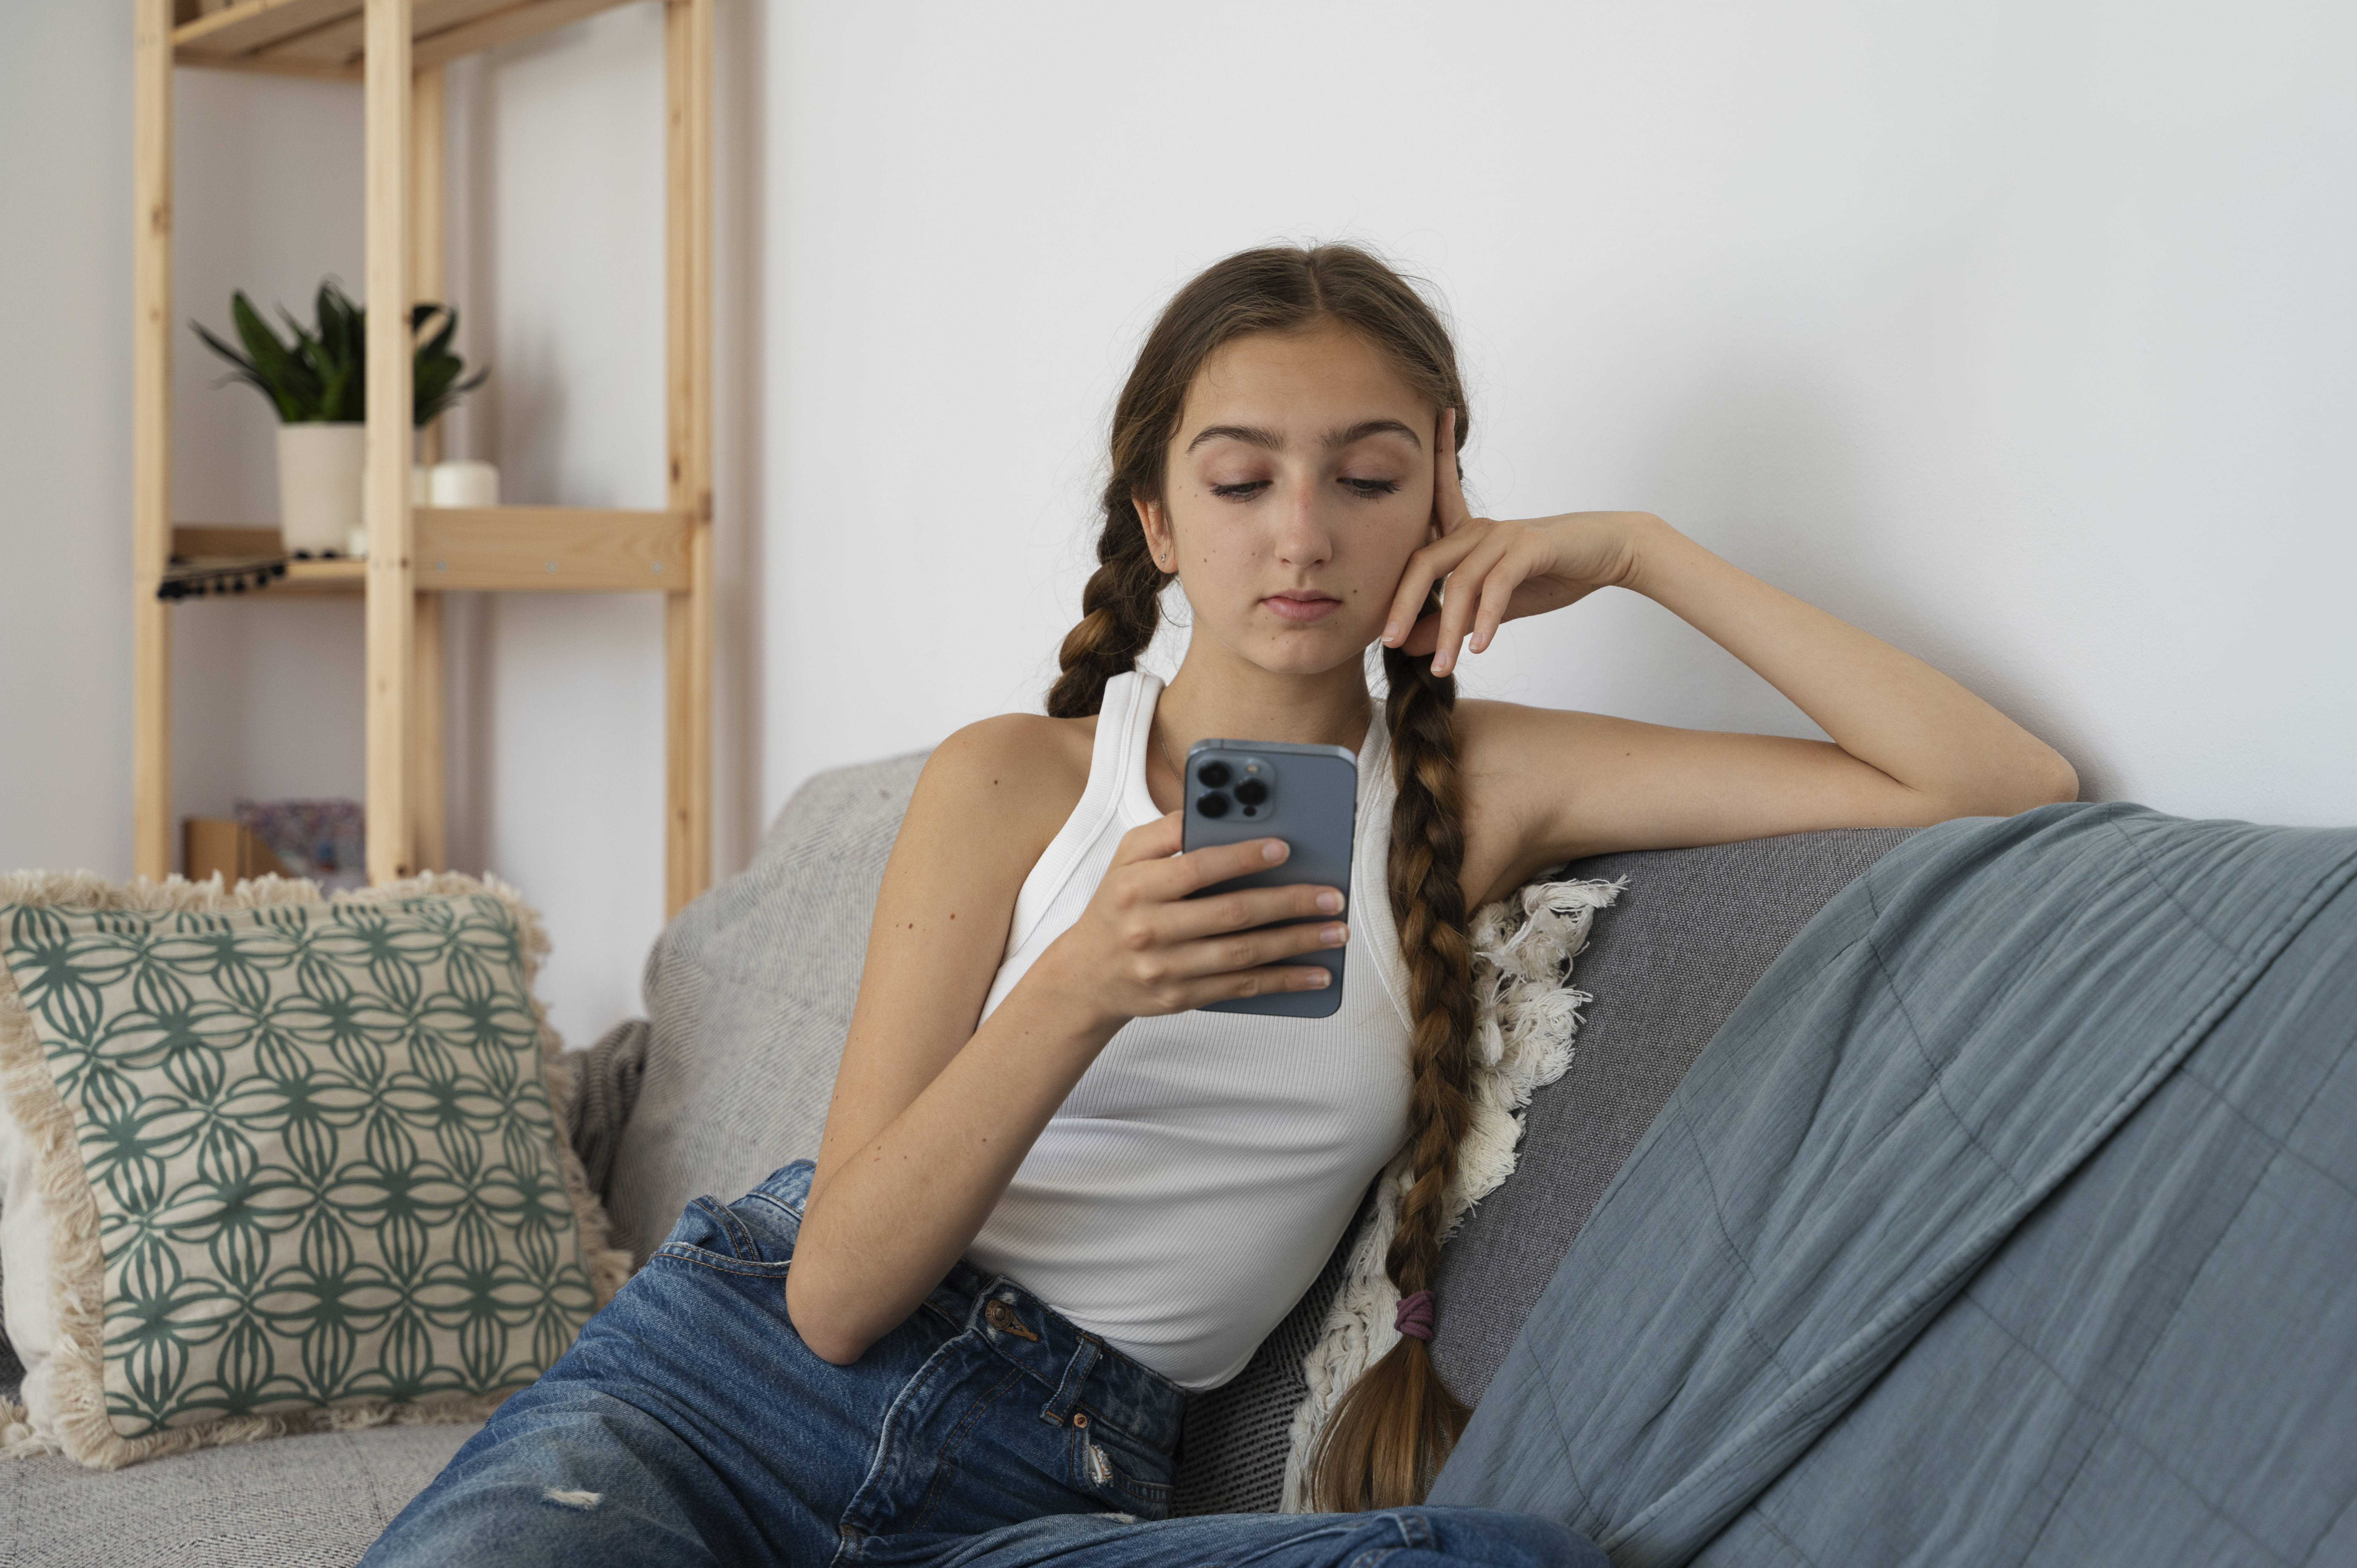 Young girl sitting on a couch and staring at her cellphone | Source: Freepik